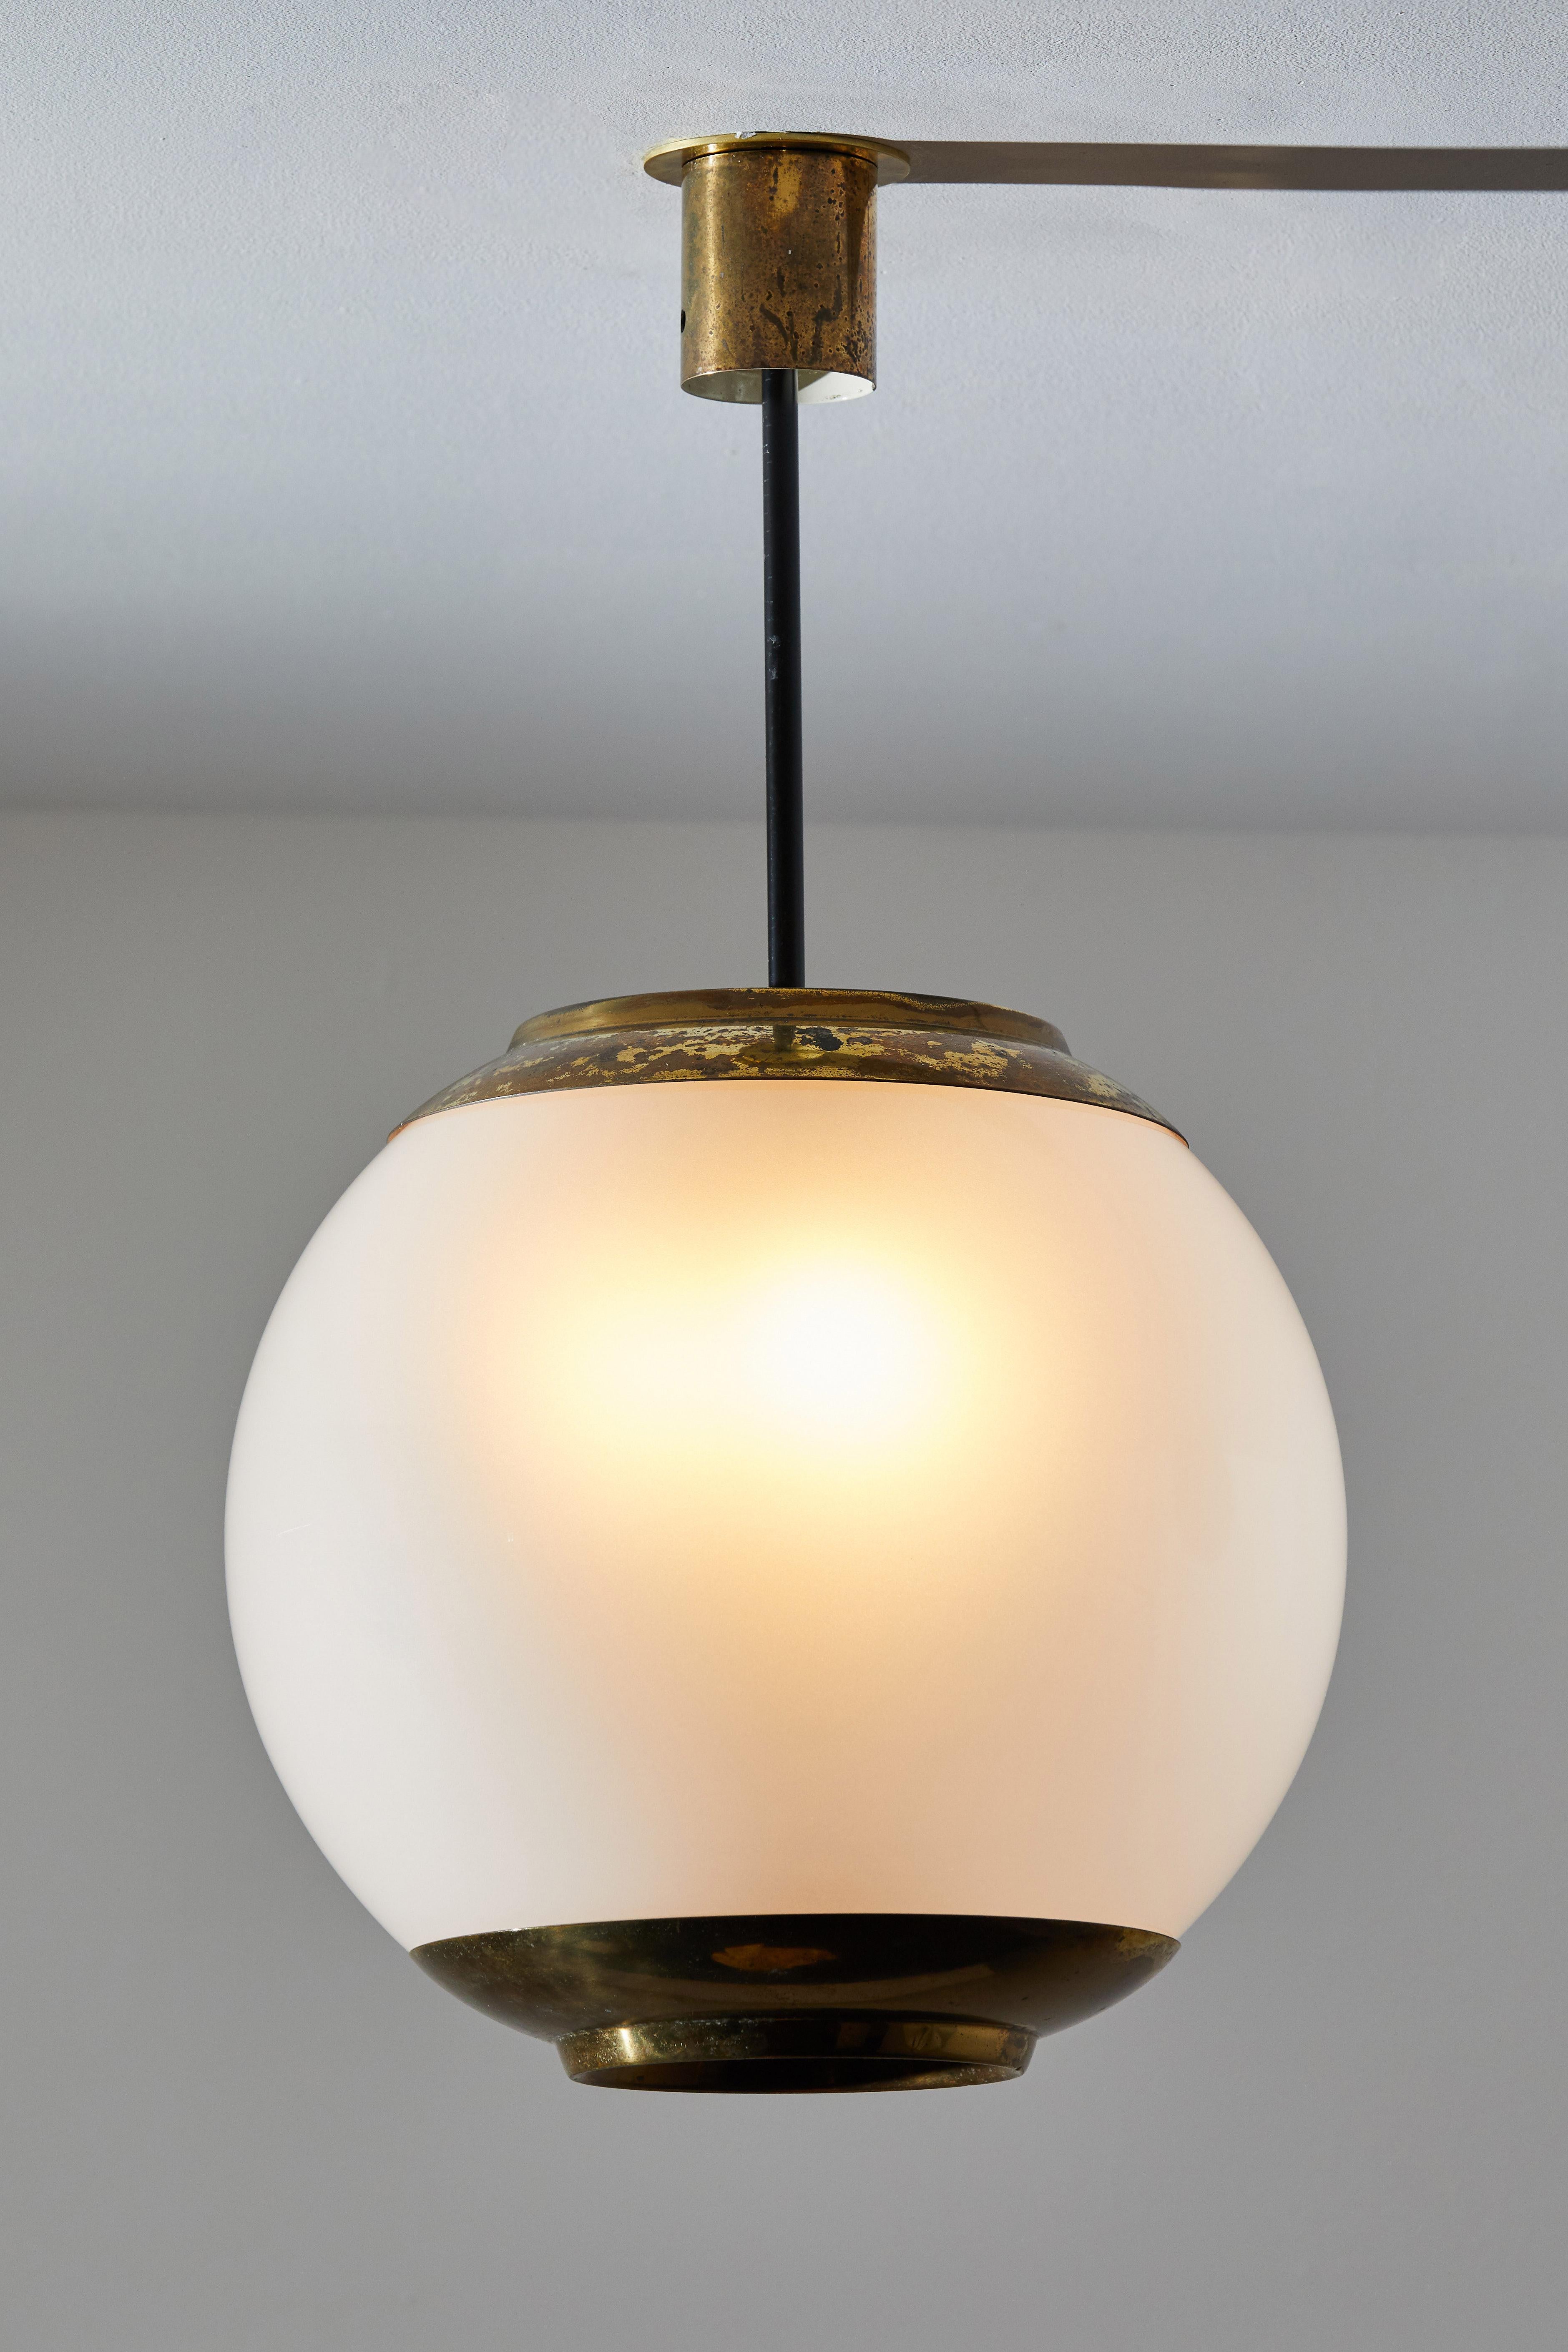 Three suspension lights by Caccia Dominioni for Azucena. Designed and manufactured in Italy, circa 1950s. Opaline glass, brass. Rewired for U.S. junction boxes. Original canopy, custom brass ceiling plate. Each light takes one E27 100w maximum bulb.